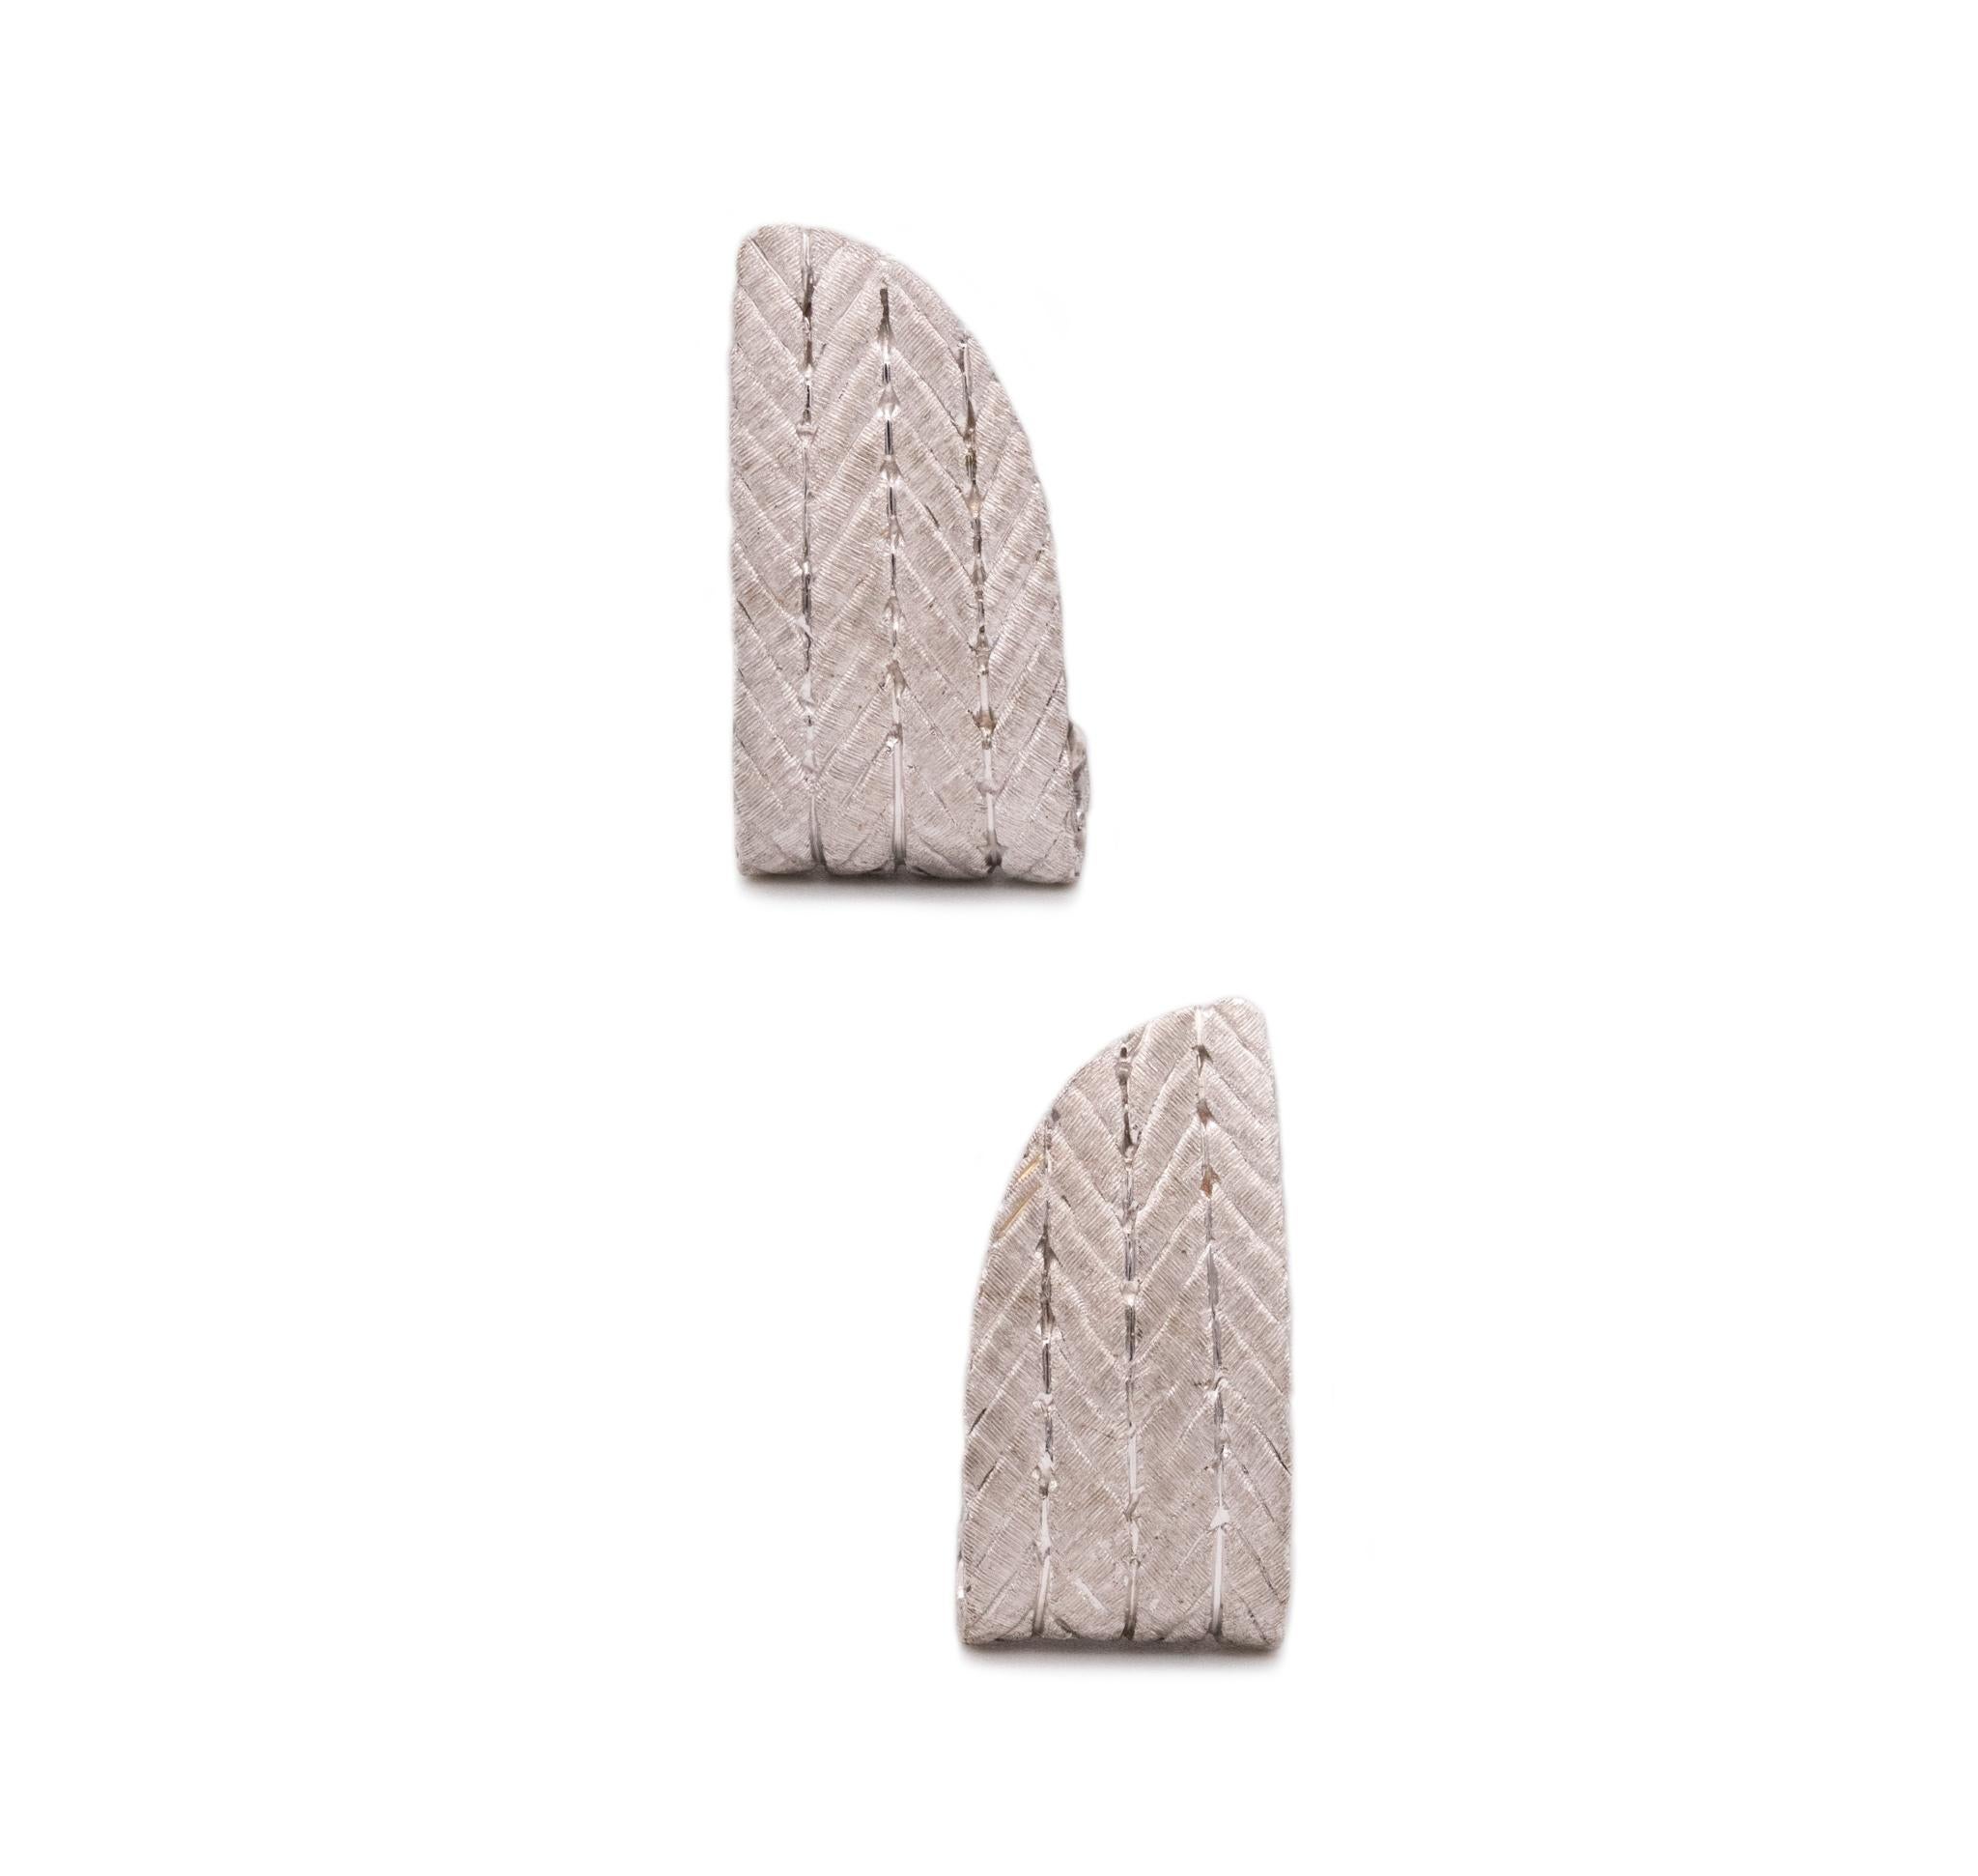 Buccellati Milano Geometric Earrings in Textured Woven 18Kt White Gold For Sale 2